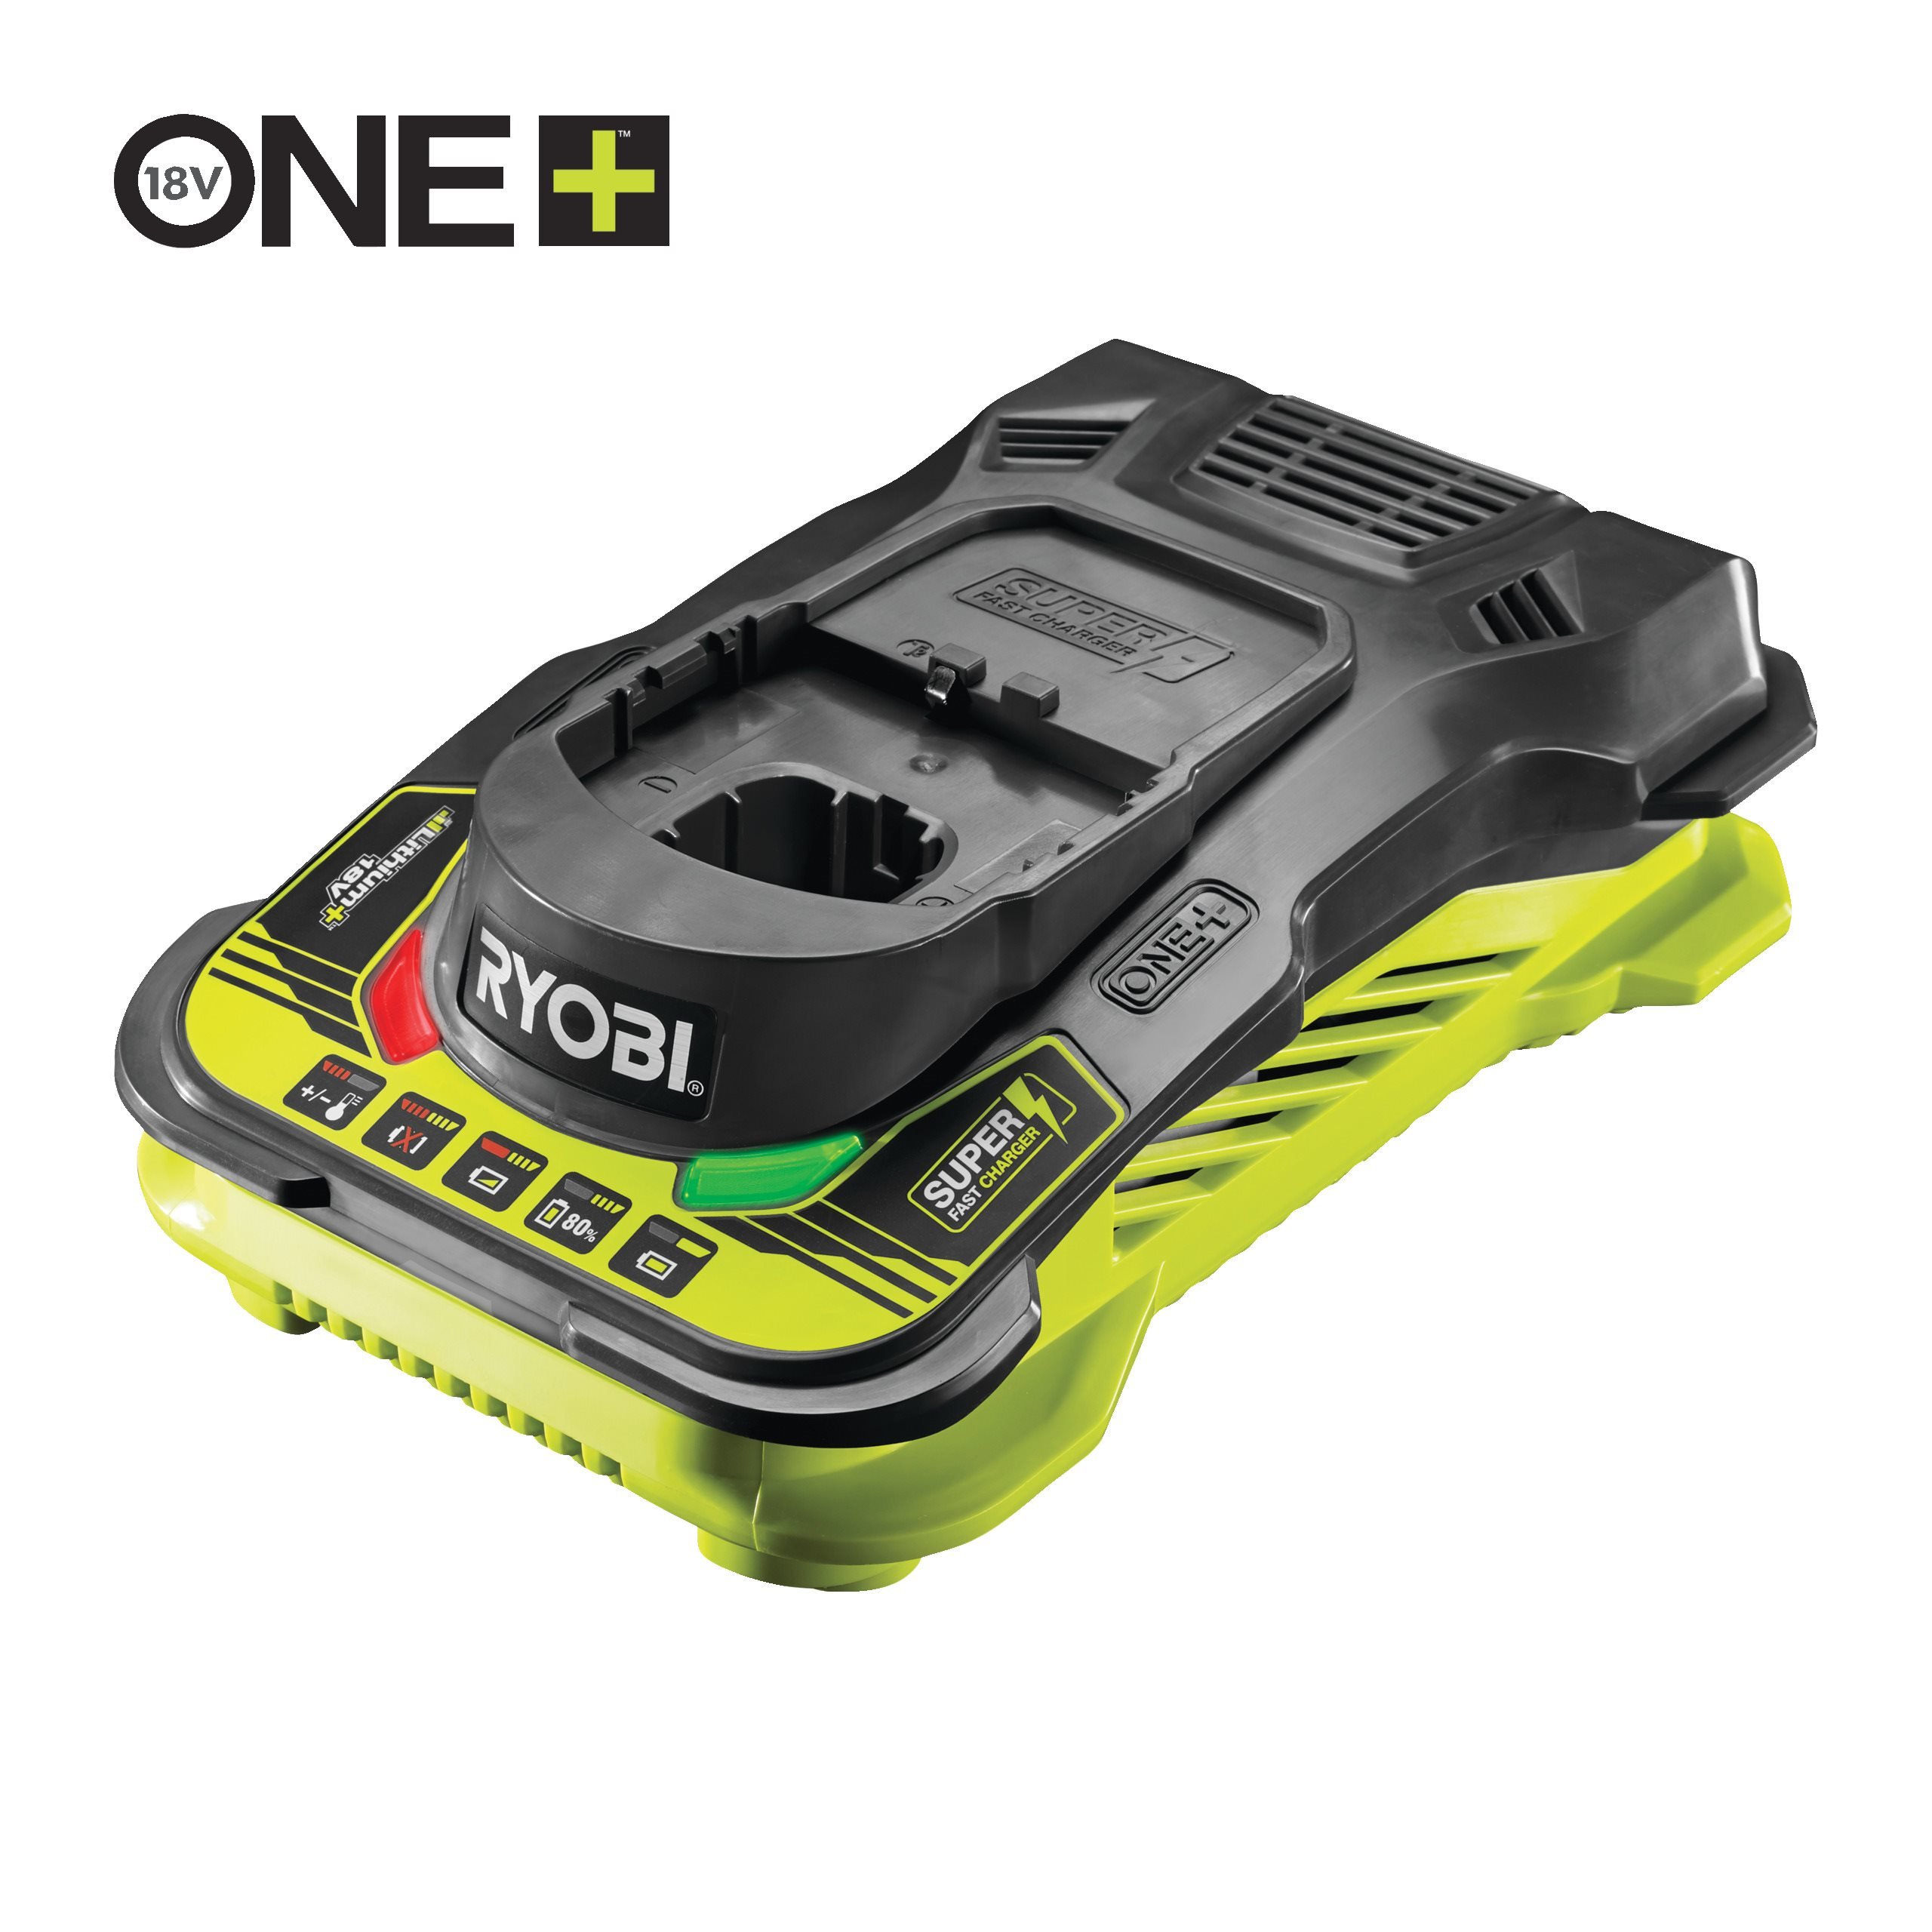 At læse jogger kryds 5A Lithium Battery Charger | RYOBI 18V ONE+™ RC18150